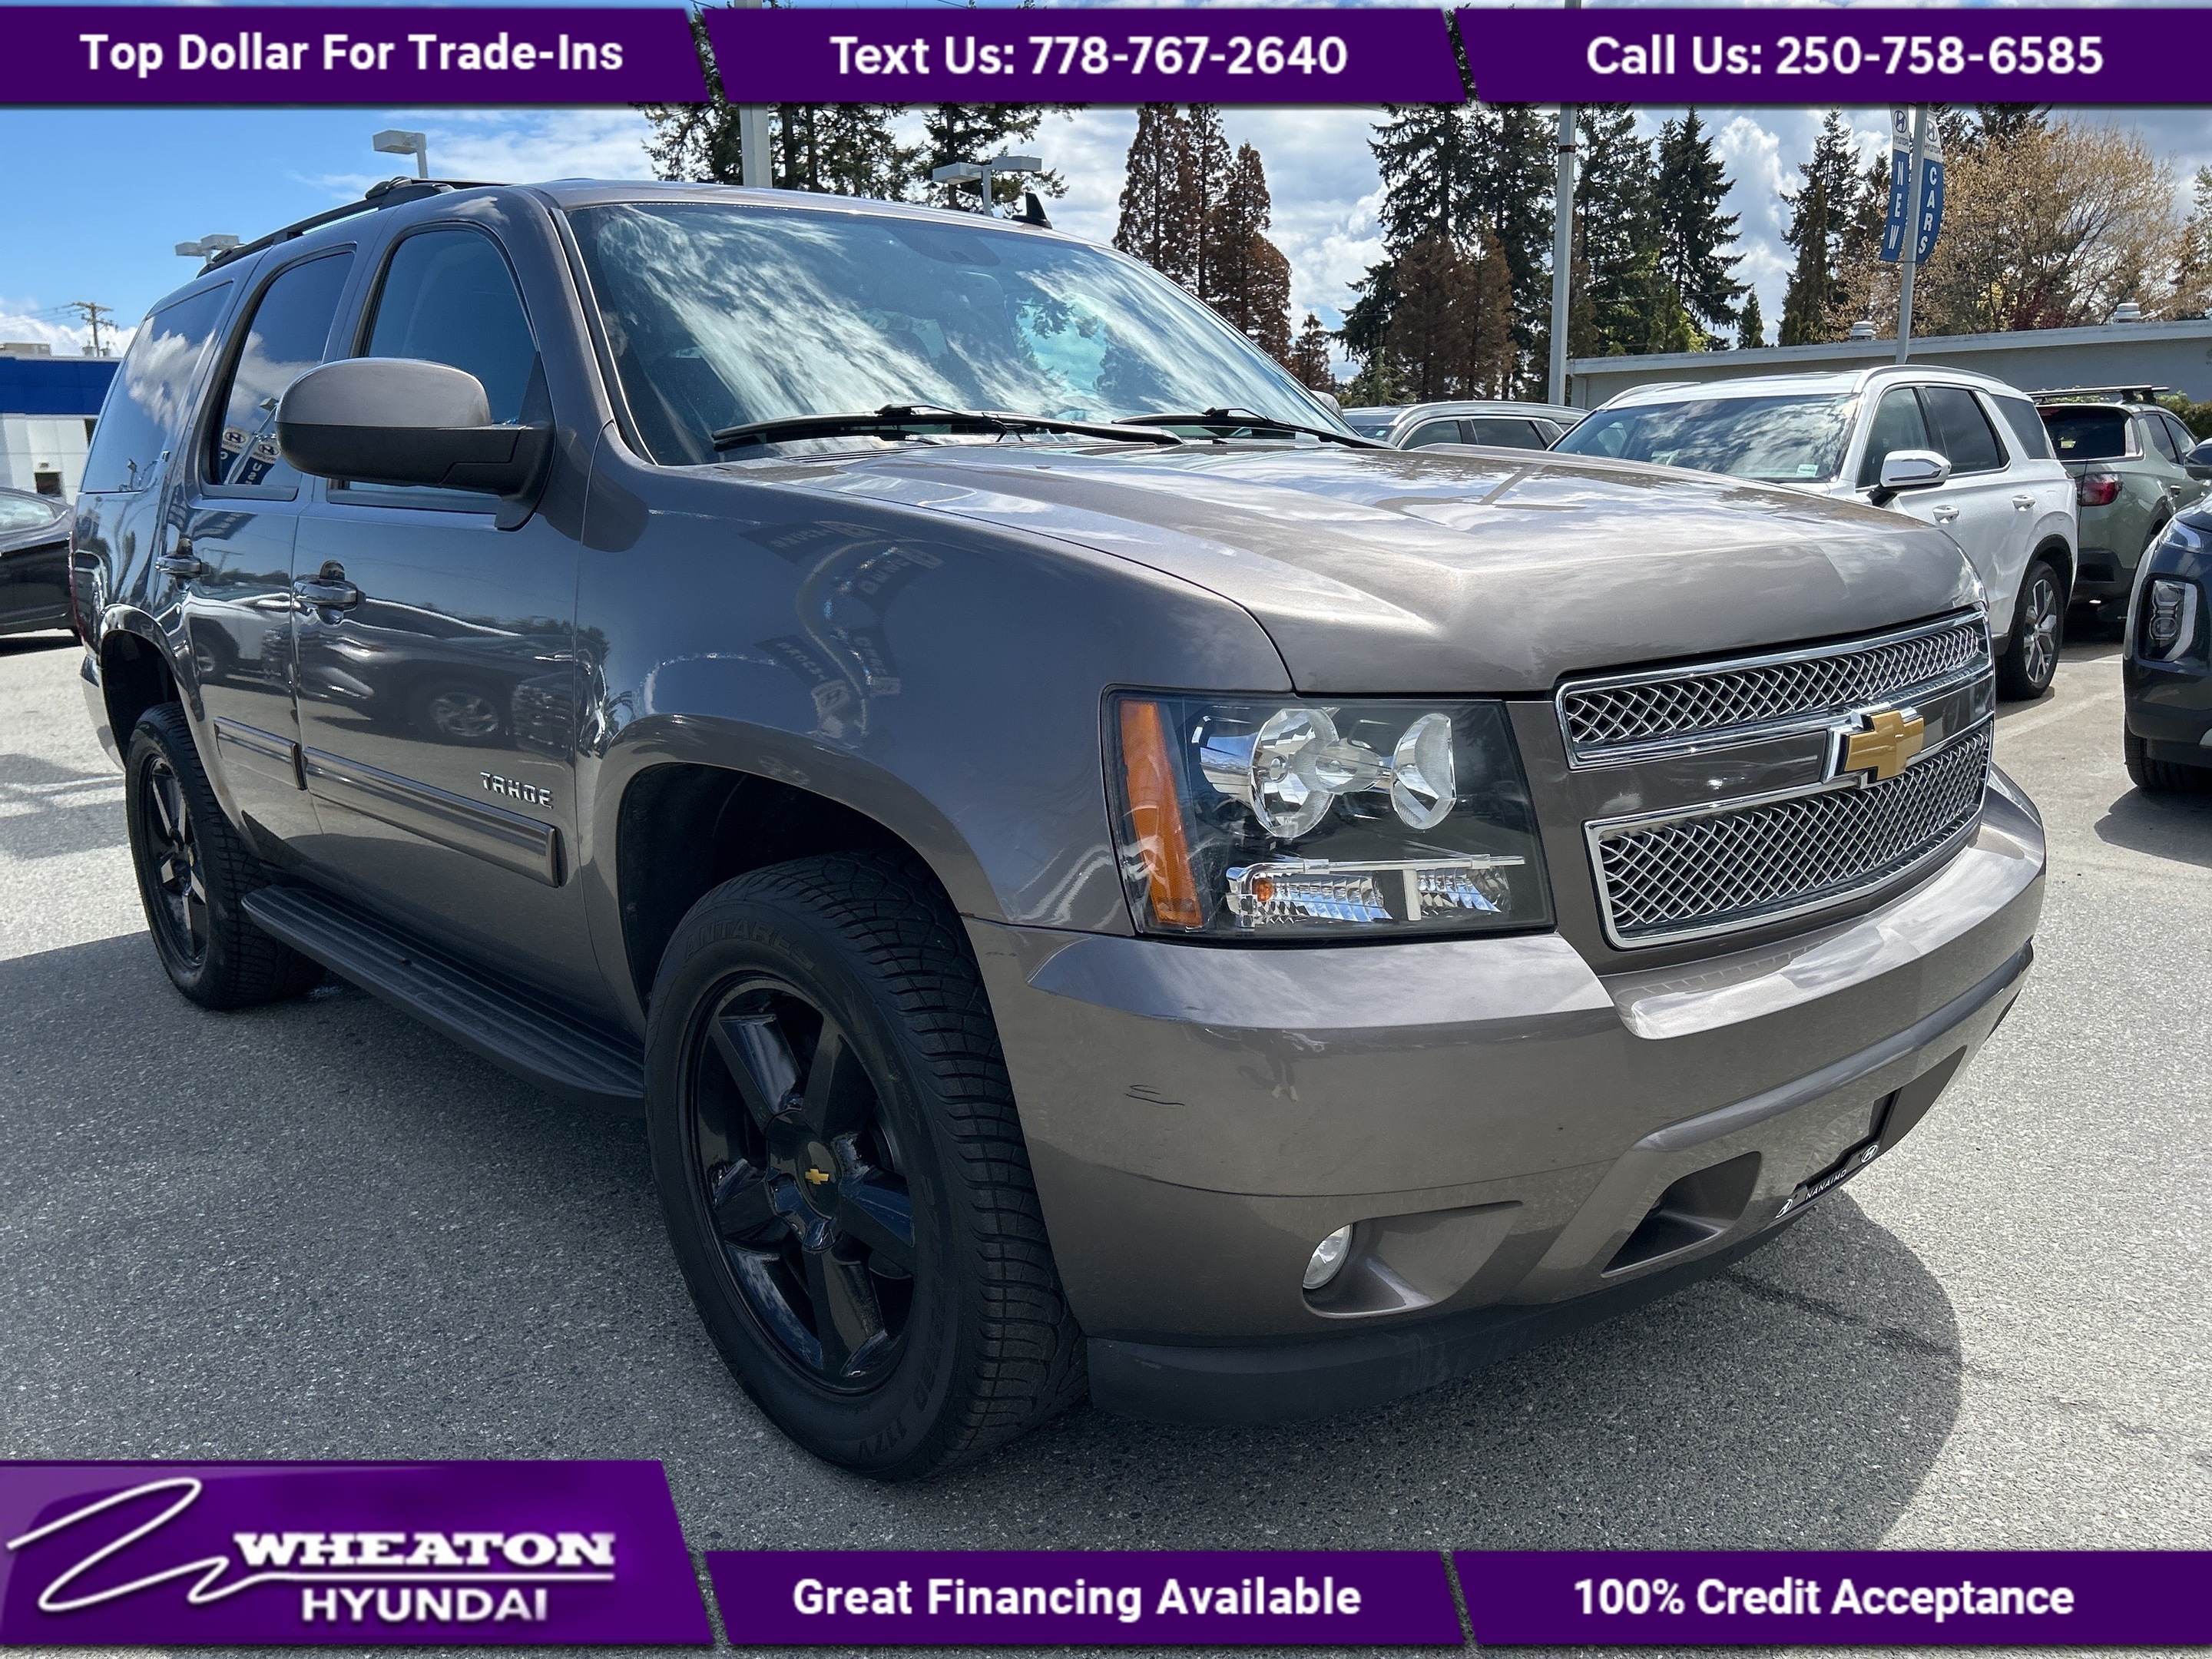 2011 Chevrolet Tahoe LT, Trade in, Leather, Heated Seats, Sunroof, DVD,